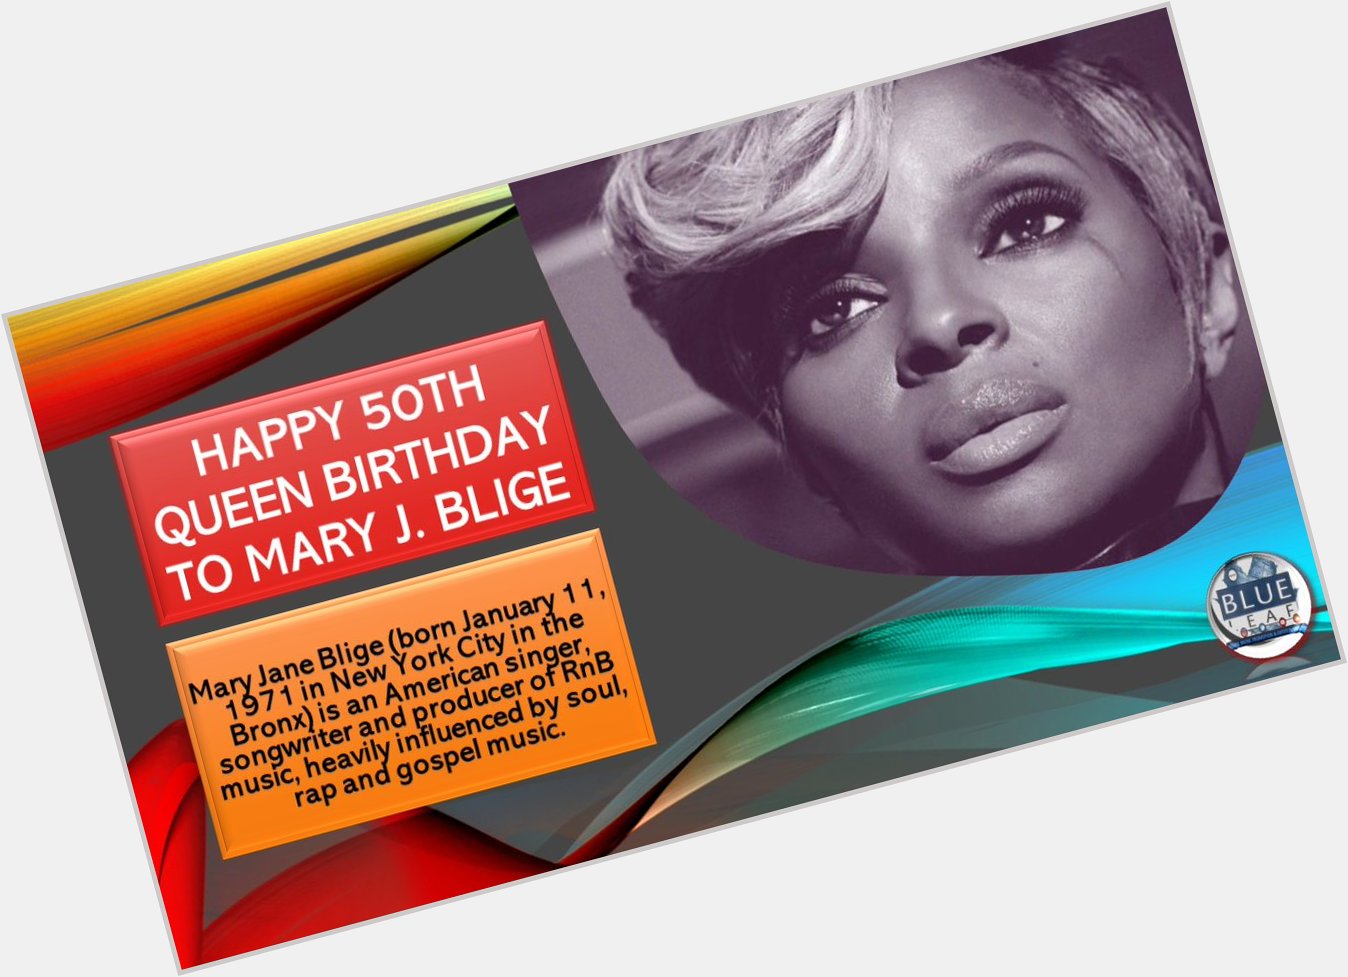 HAPPY 50TH QUEEN BIRTHDAY TO MARY J. BLIGE    